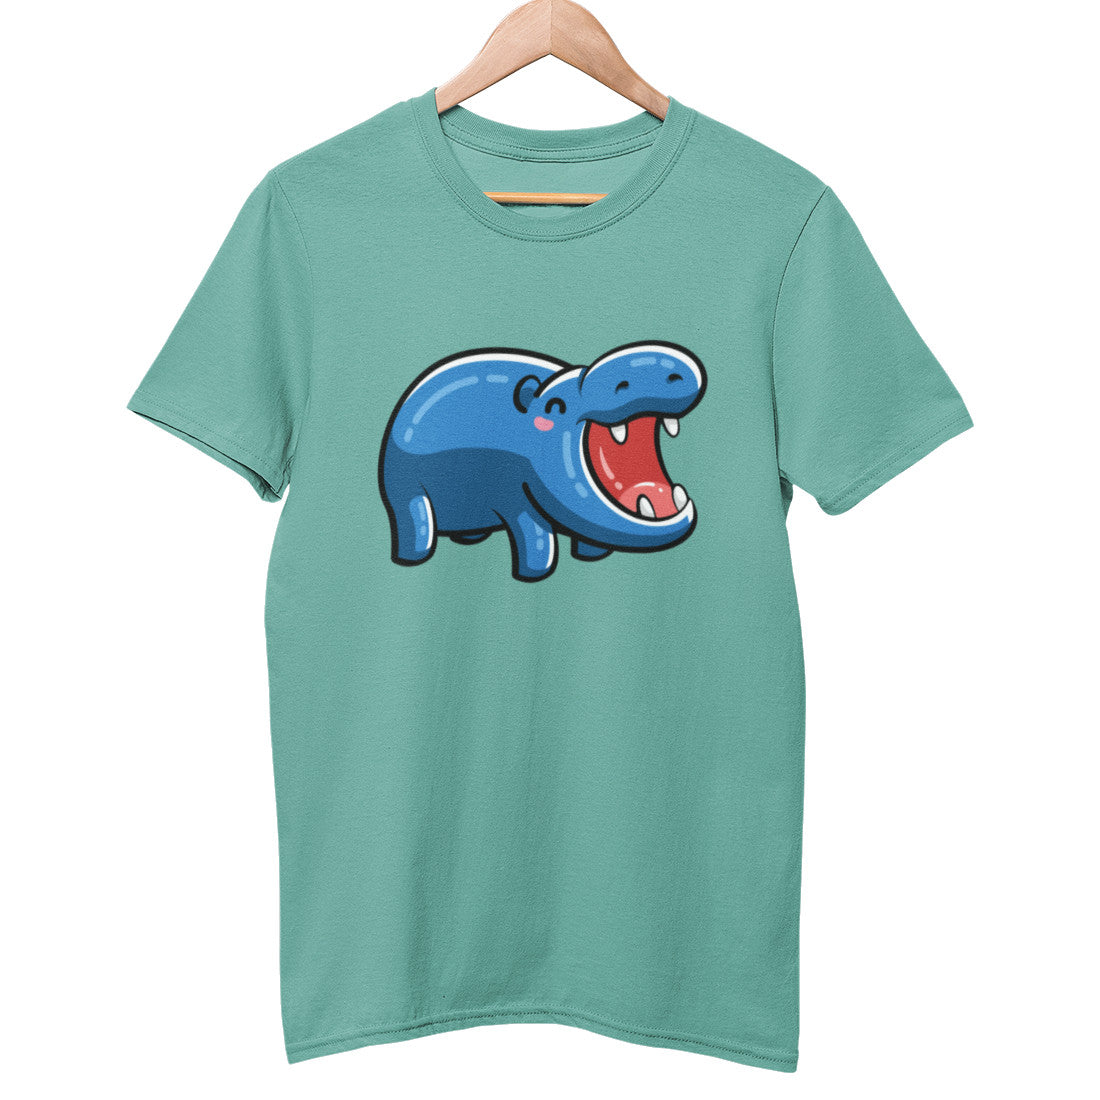 A green colour unisex crewneck t-shirt on a hanger with a design on its chest of a kawaii cute blue hippo with its mouth gaping open wide in a huge grin and facing at an angle outwards and to the right